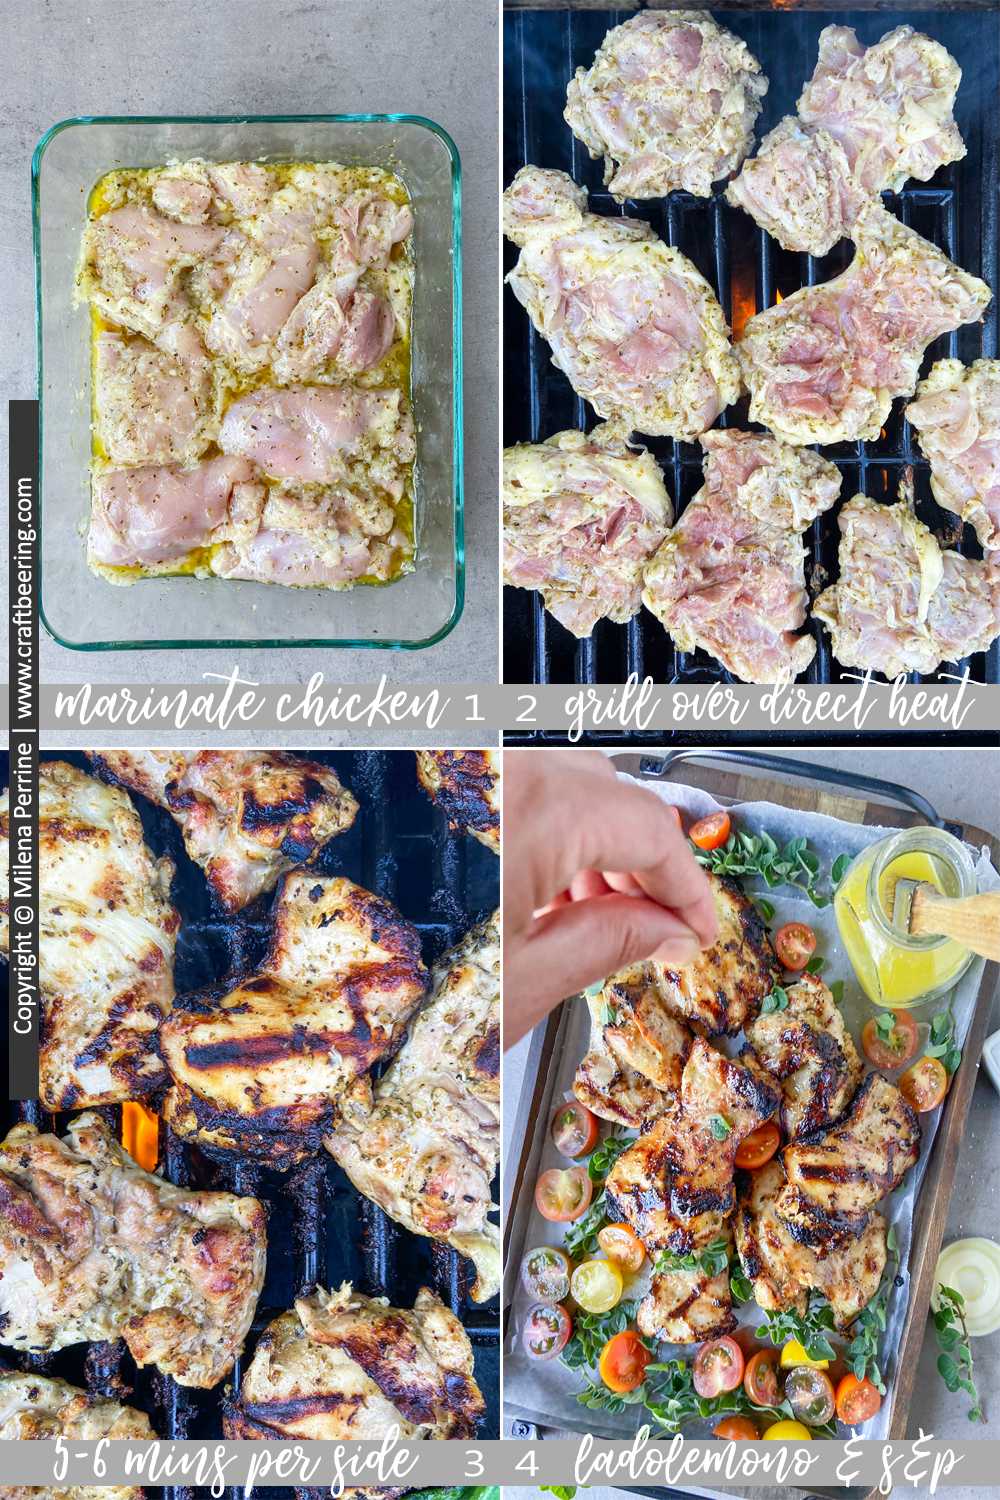 How to grill boneless skinless chicken thighs - step by step.